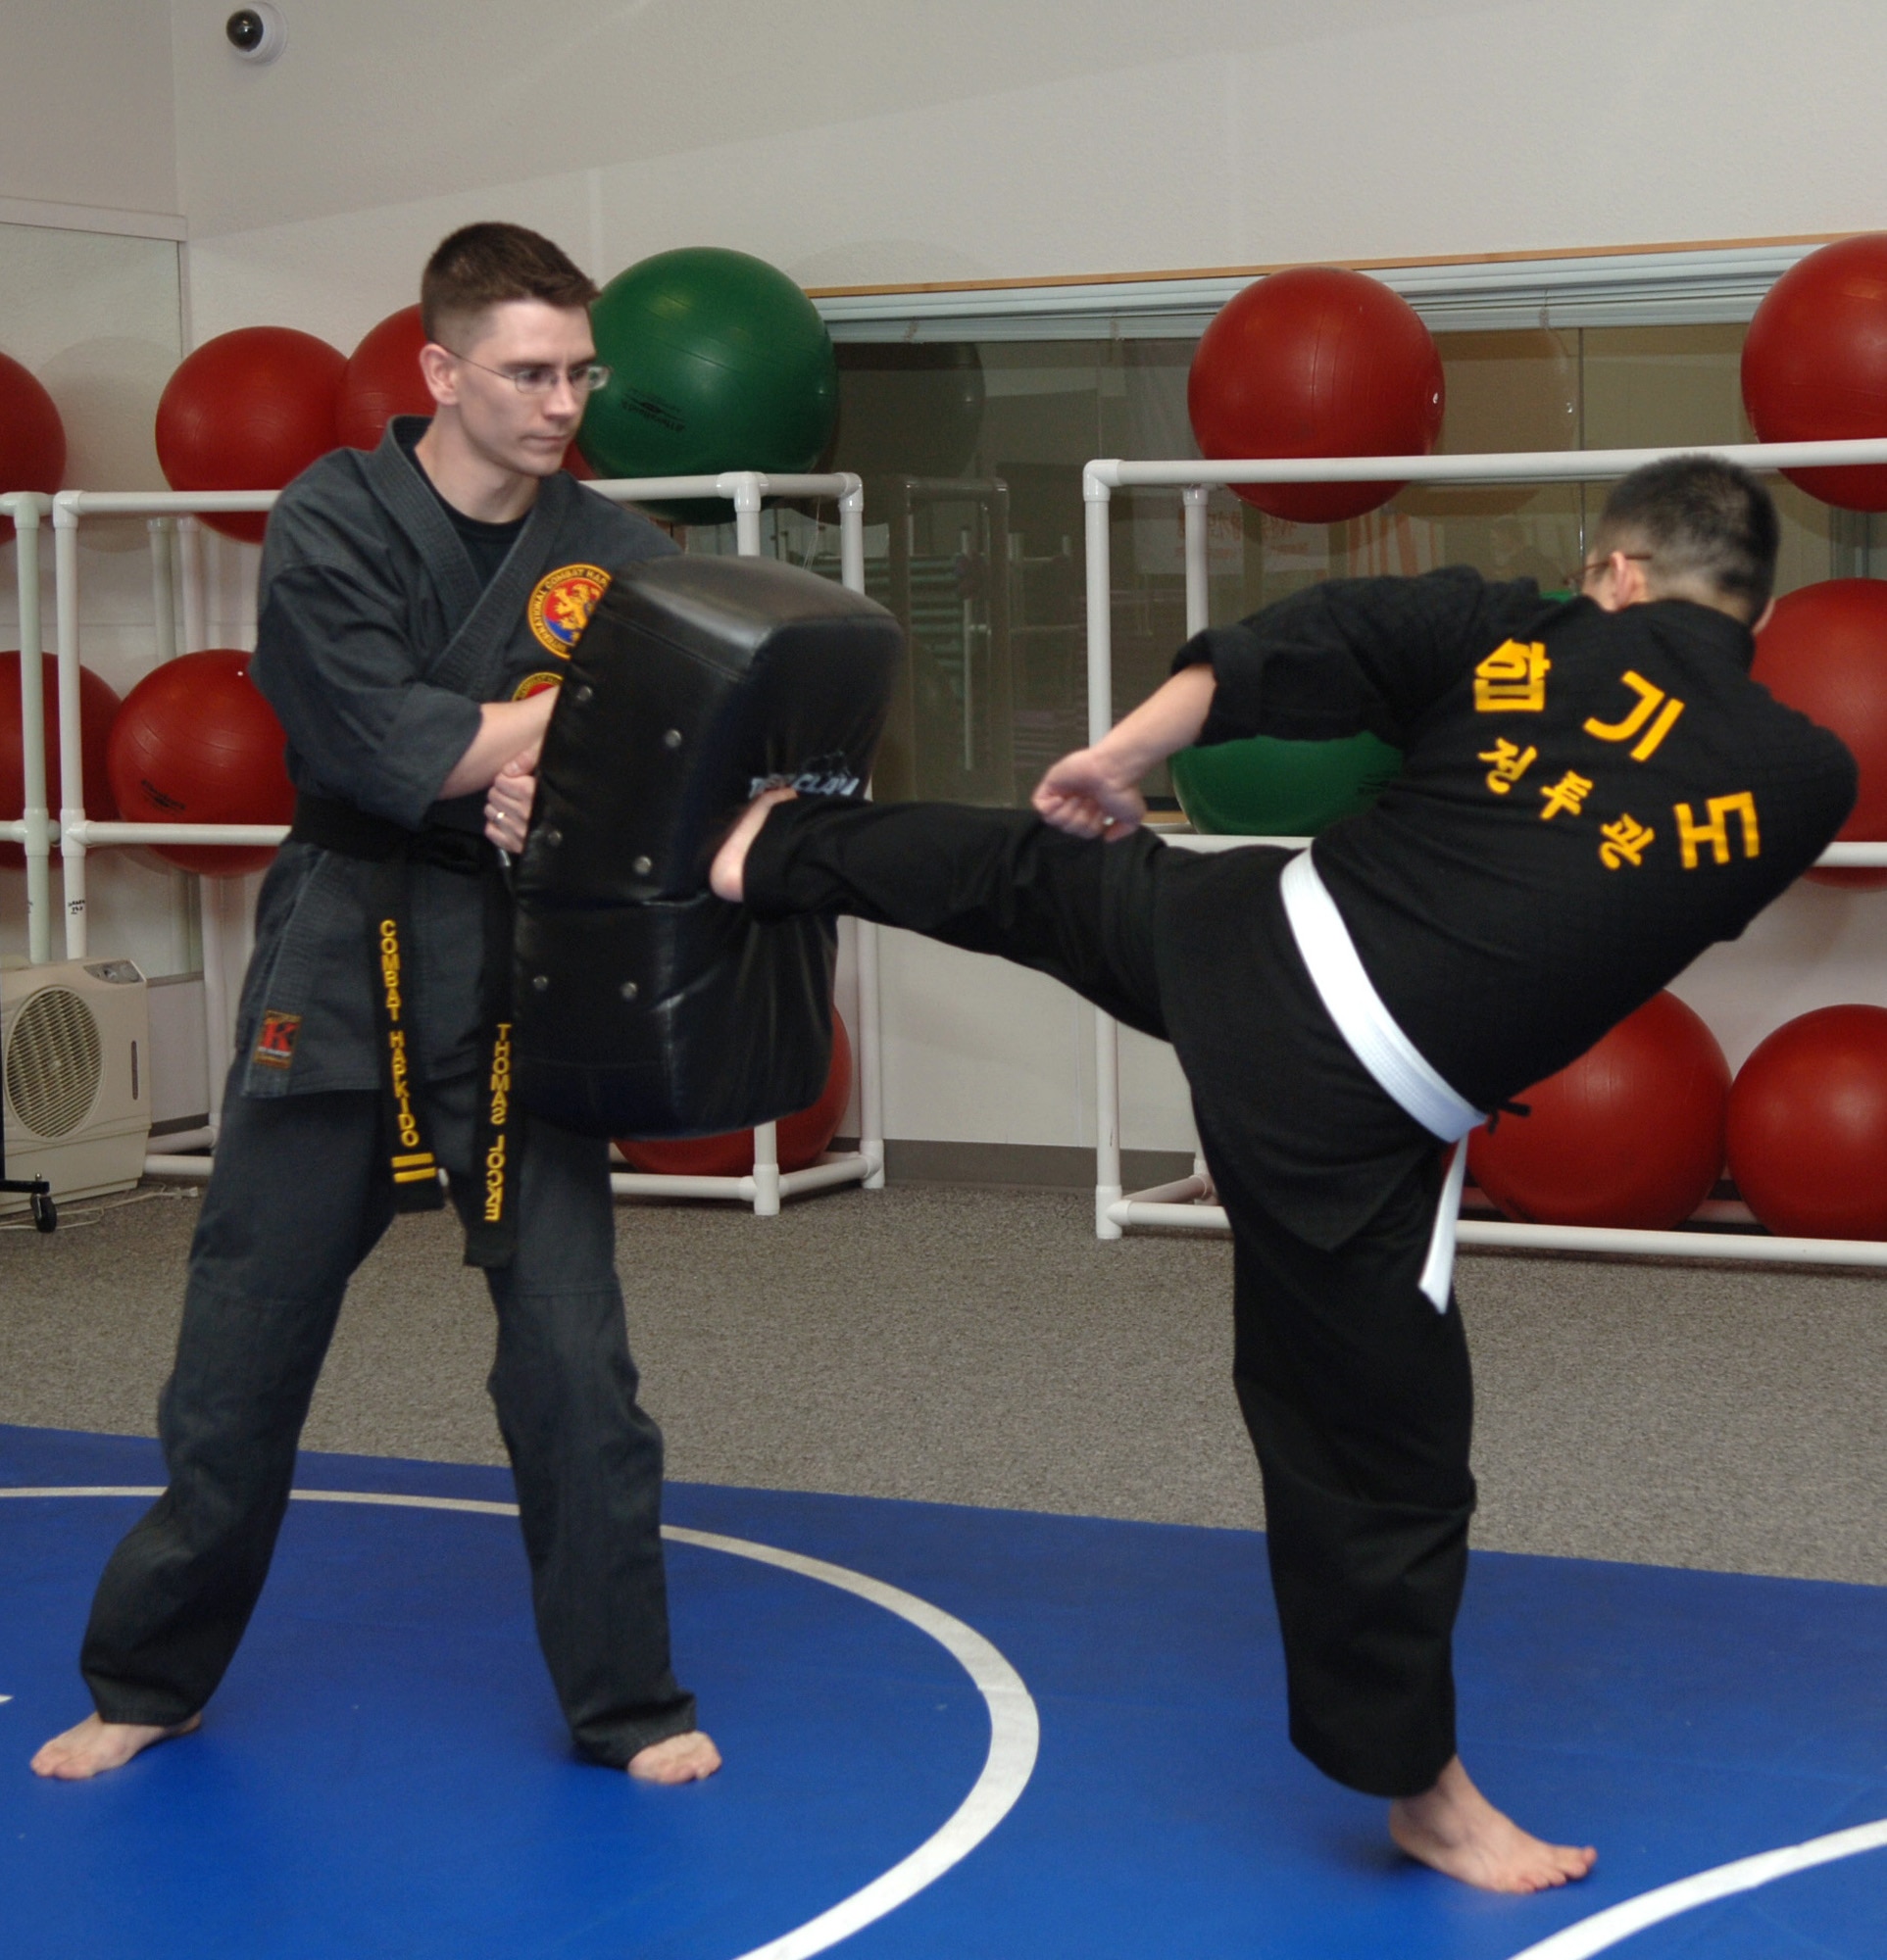 FAIRCHILD AIR FORCE BASE, Wash. -- Airman 1st Class Gyuseok James Kang, 92nd Communications Squadron, practices a side kick as instructed by Staff Sgt. Thomas Locke, 92nd Communications Squadron network administrator, during the Combat Hapkido class taught at the base Fitness Center Feb. 5. The Combat Hapkido class, which teaches self defense, is offered Tuesdays and Thursdays from 6 to 8 p.m. at the Fitness Center. (U.S. Air Force photo / Senior Airman Jocelyn Ford)